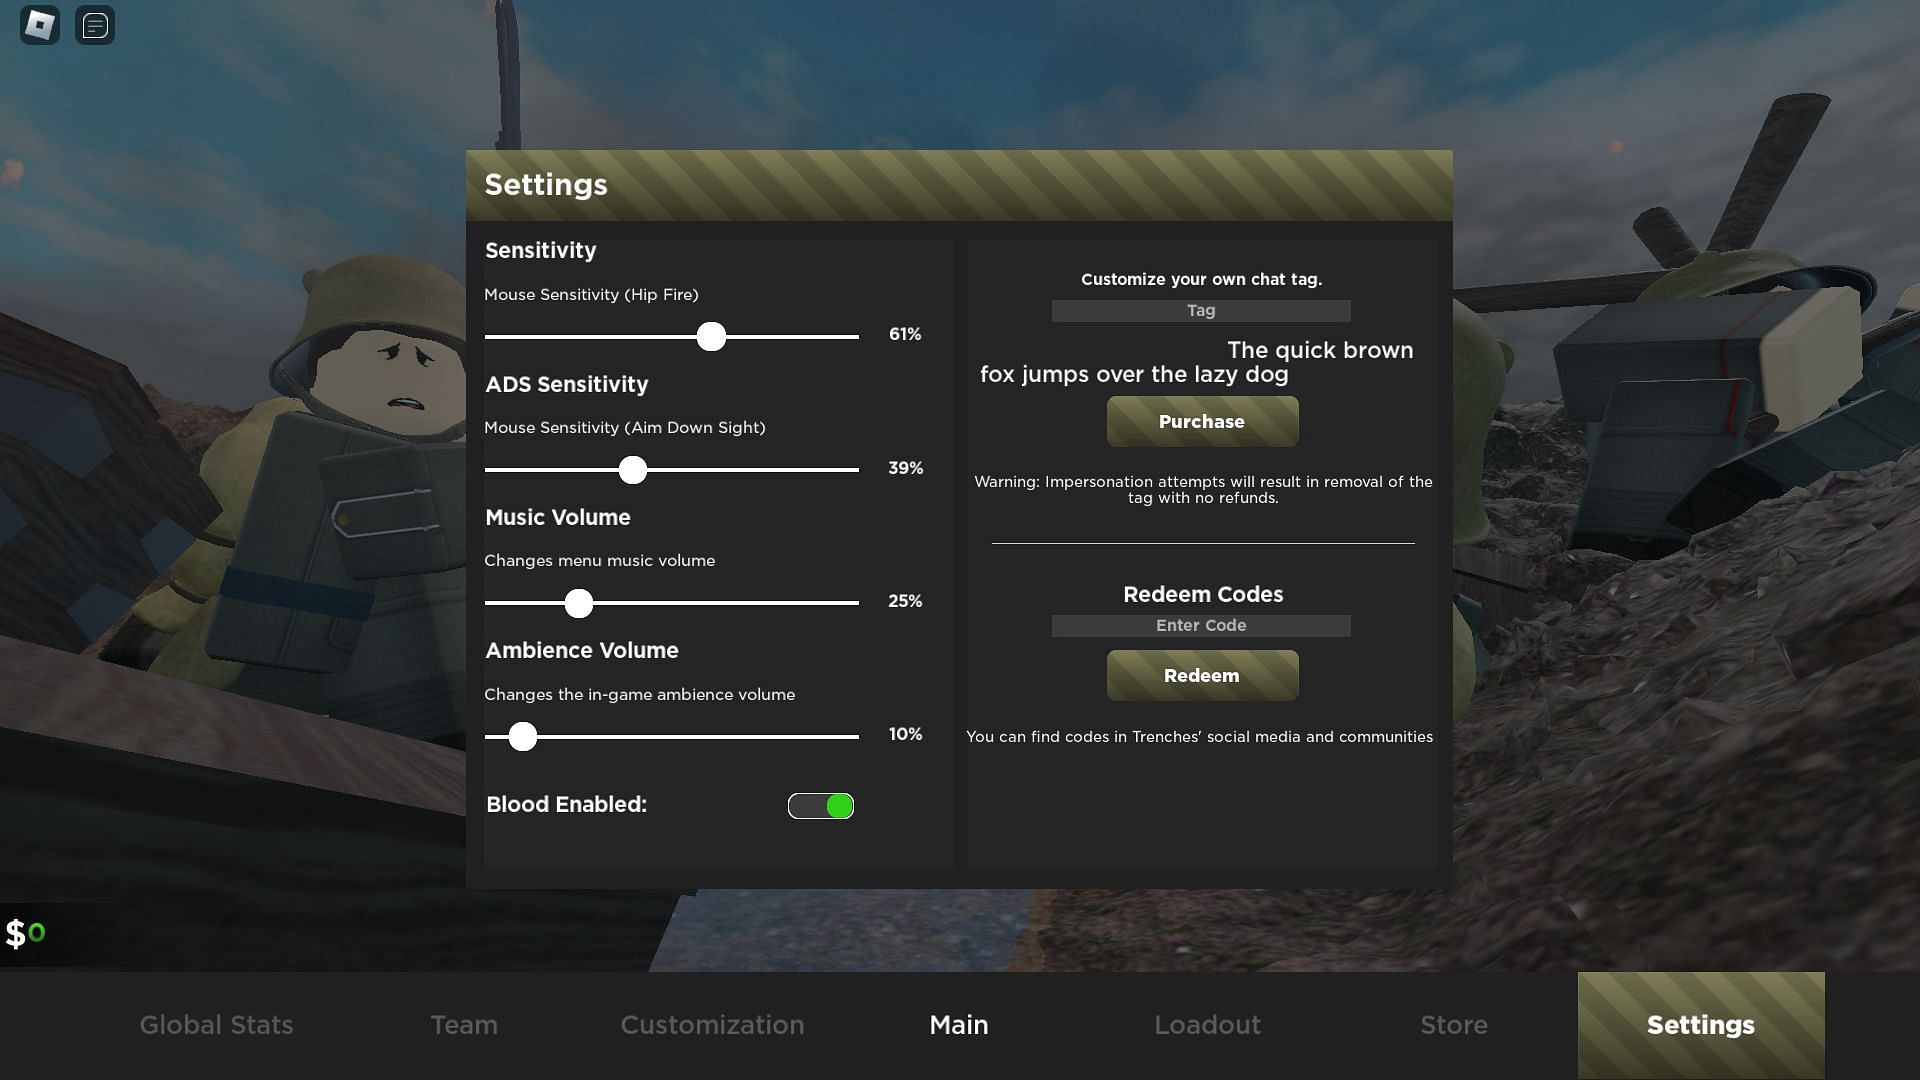 Active codes for Trenches (Image via Roblox)